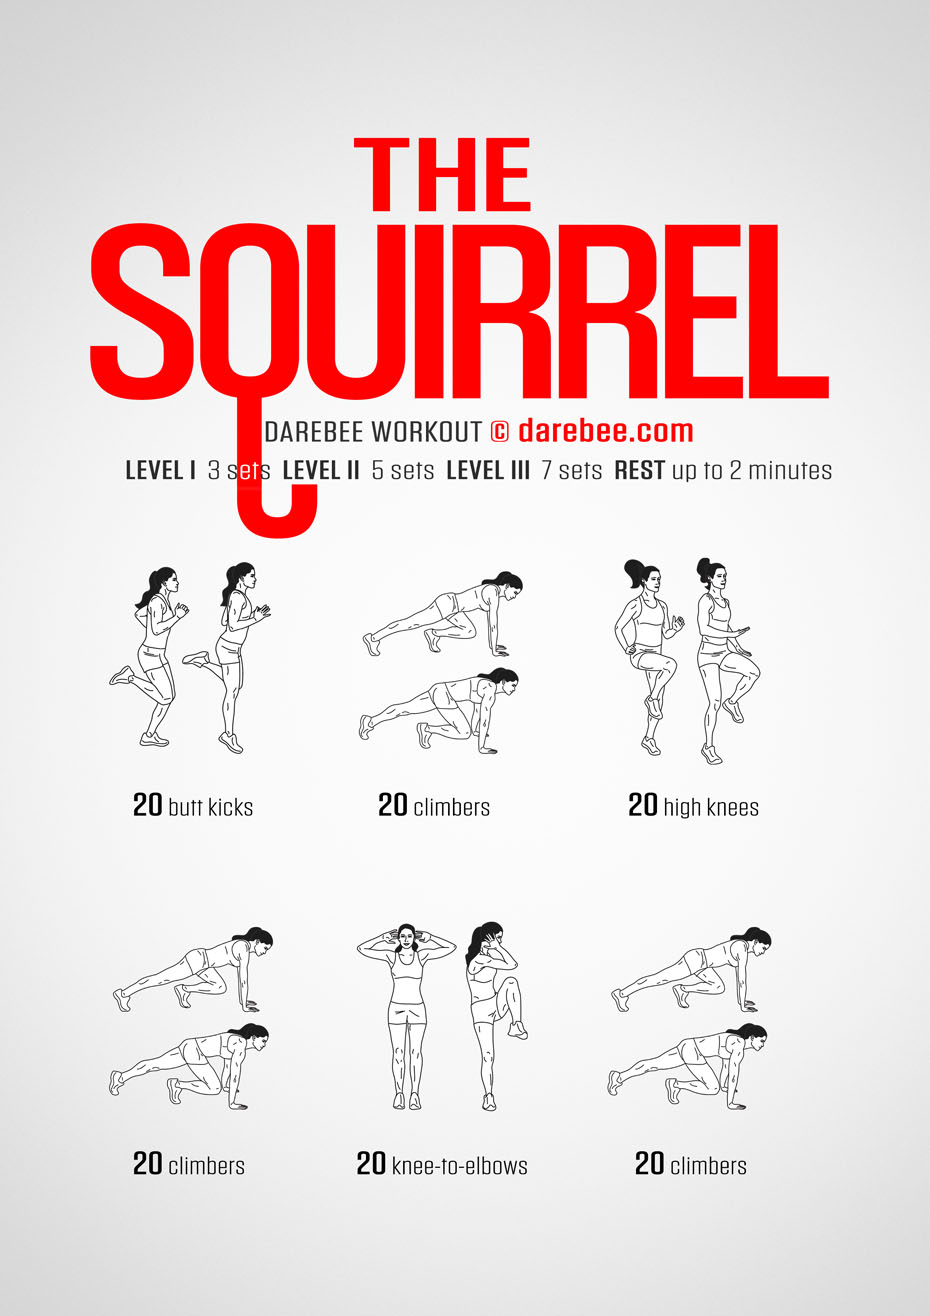 The Squirrel is a Darebee no-equipment home fitness workout designed to make you fast and make you nimble